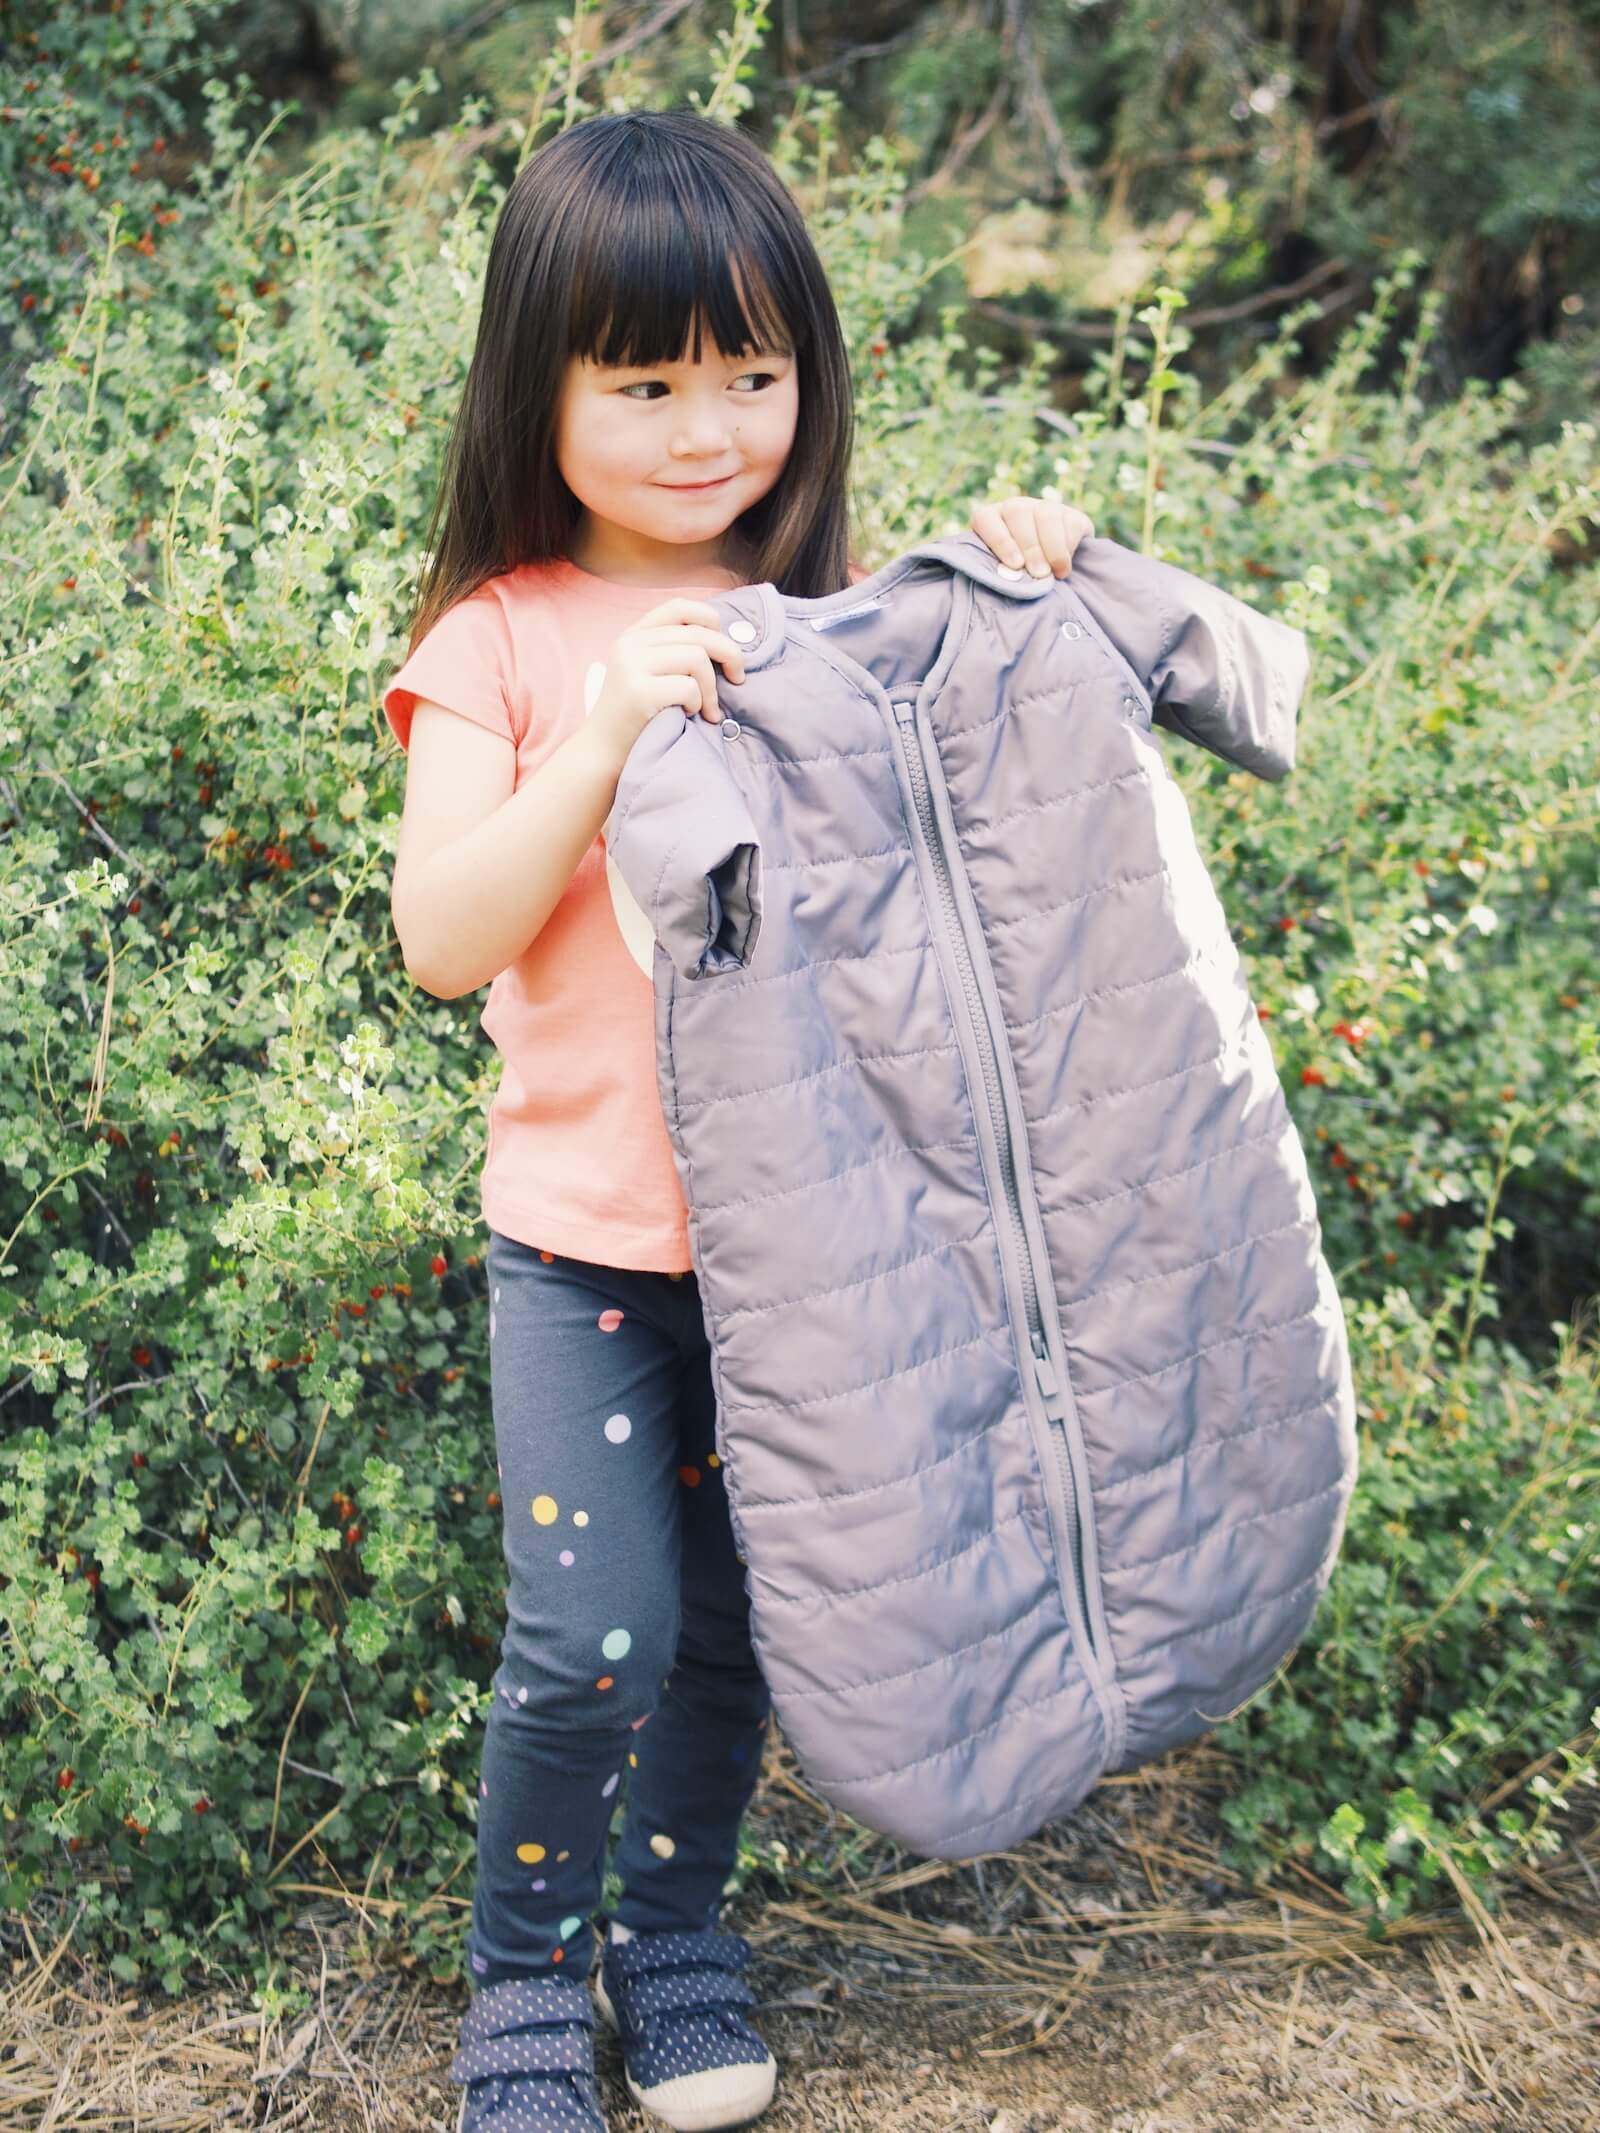 A new winter-weight wearable sleeping bag for baby for camping trips